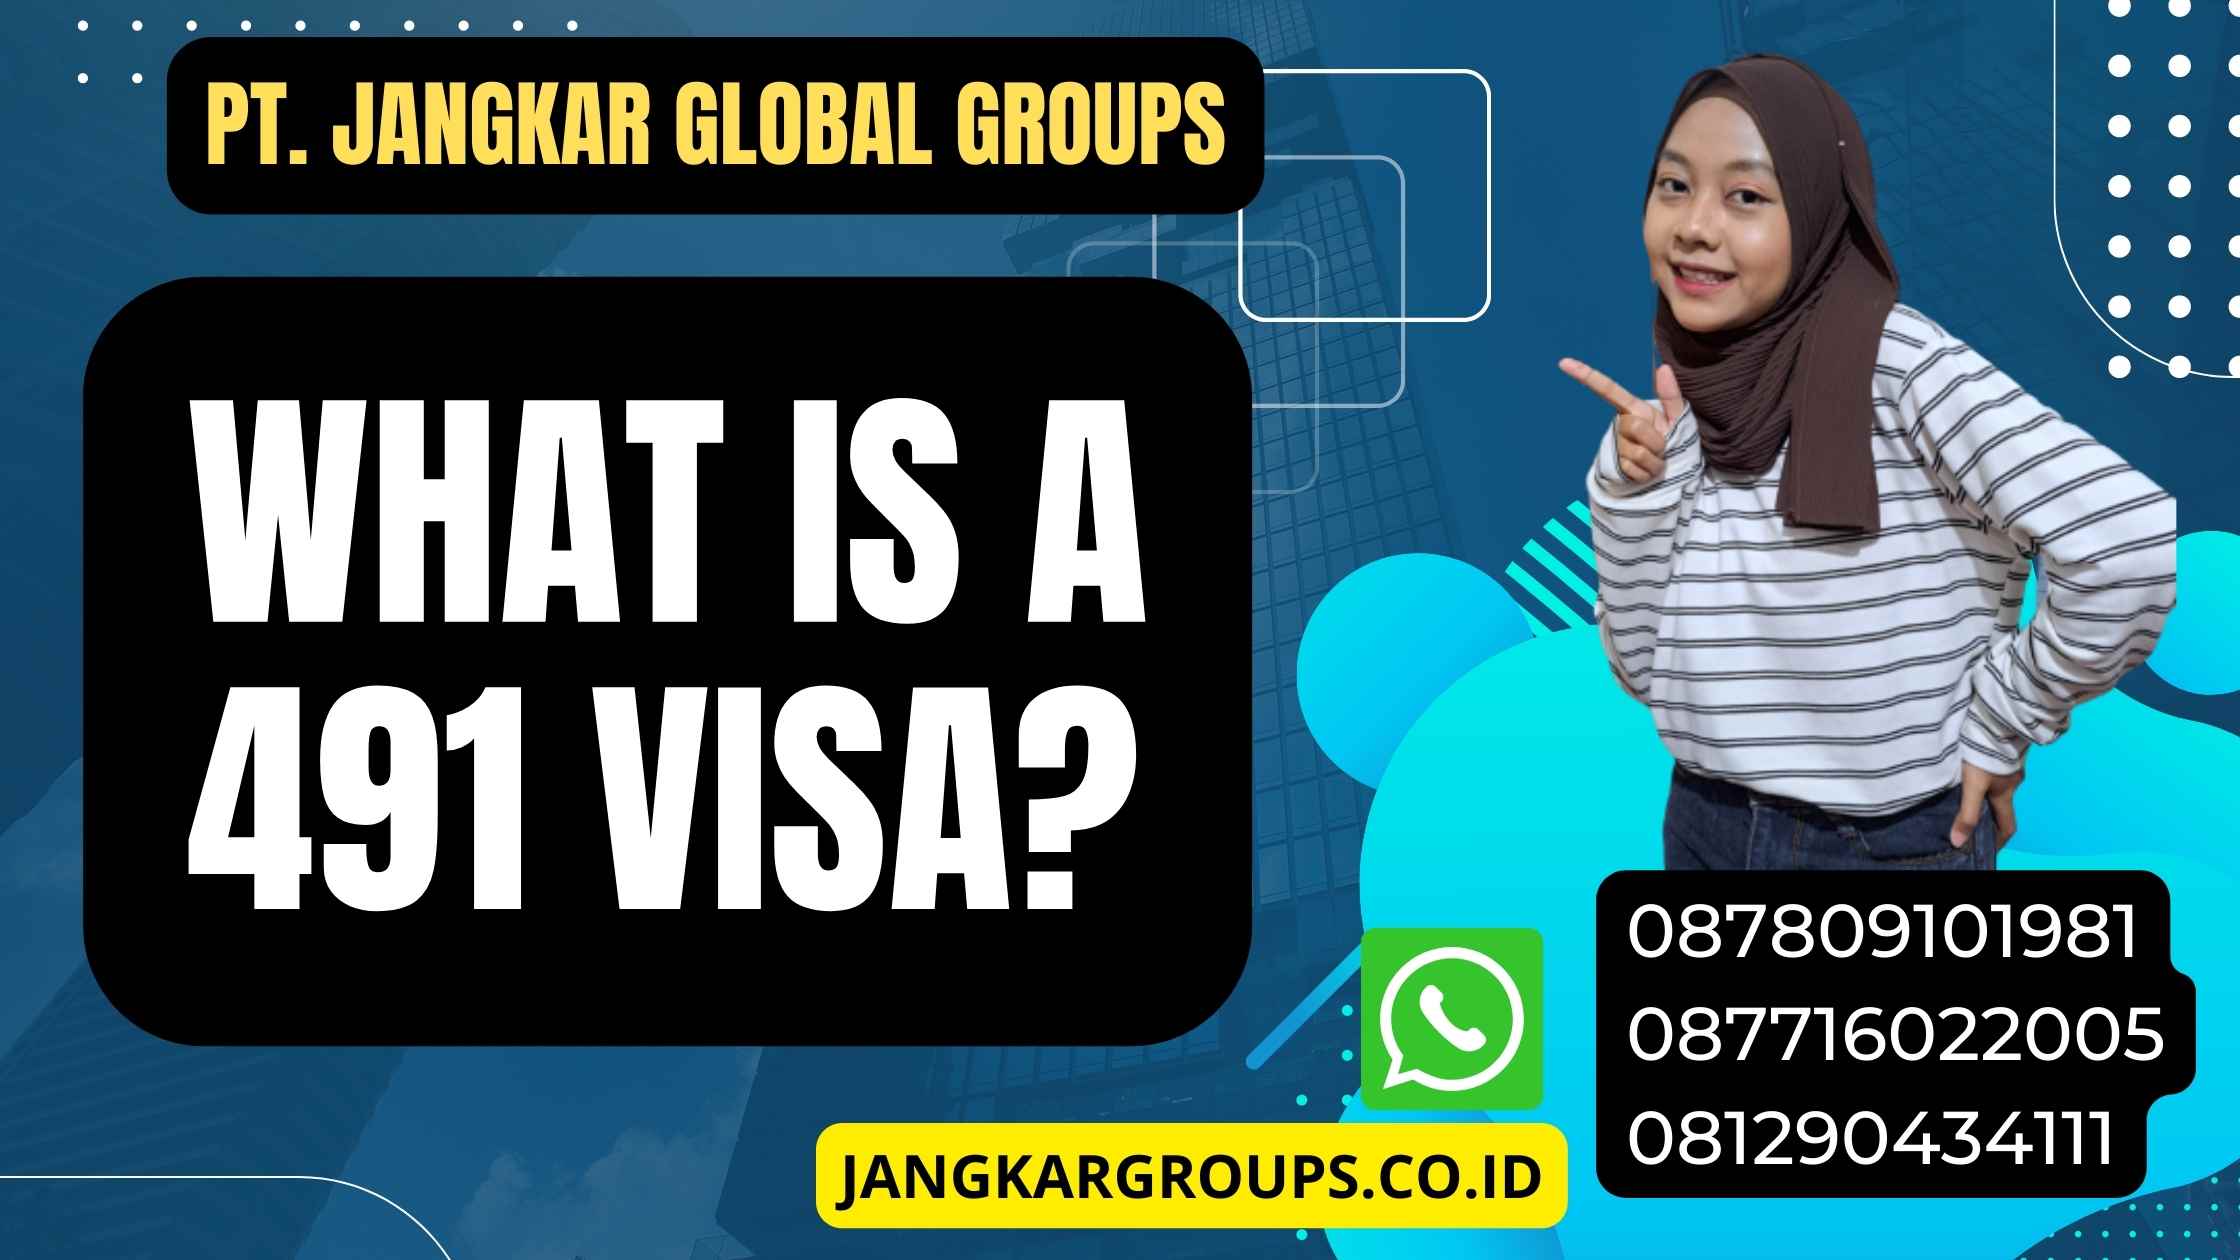 What is a 491 visa?